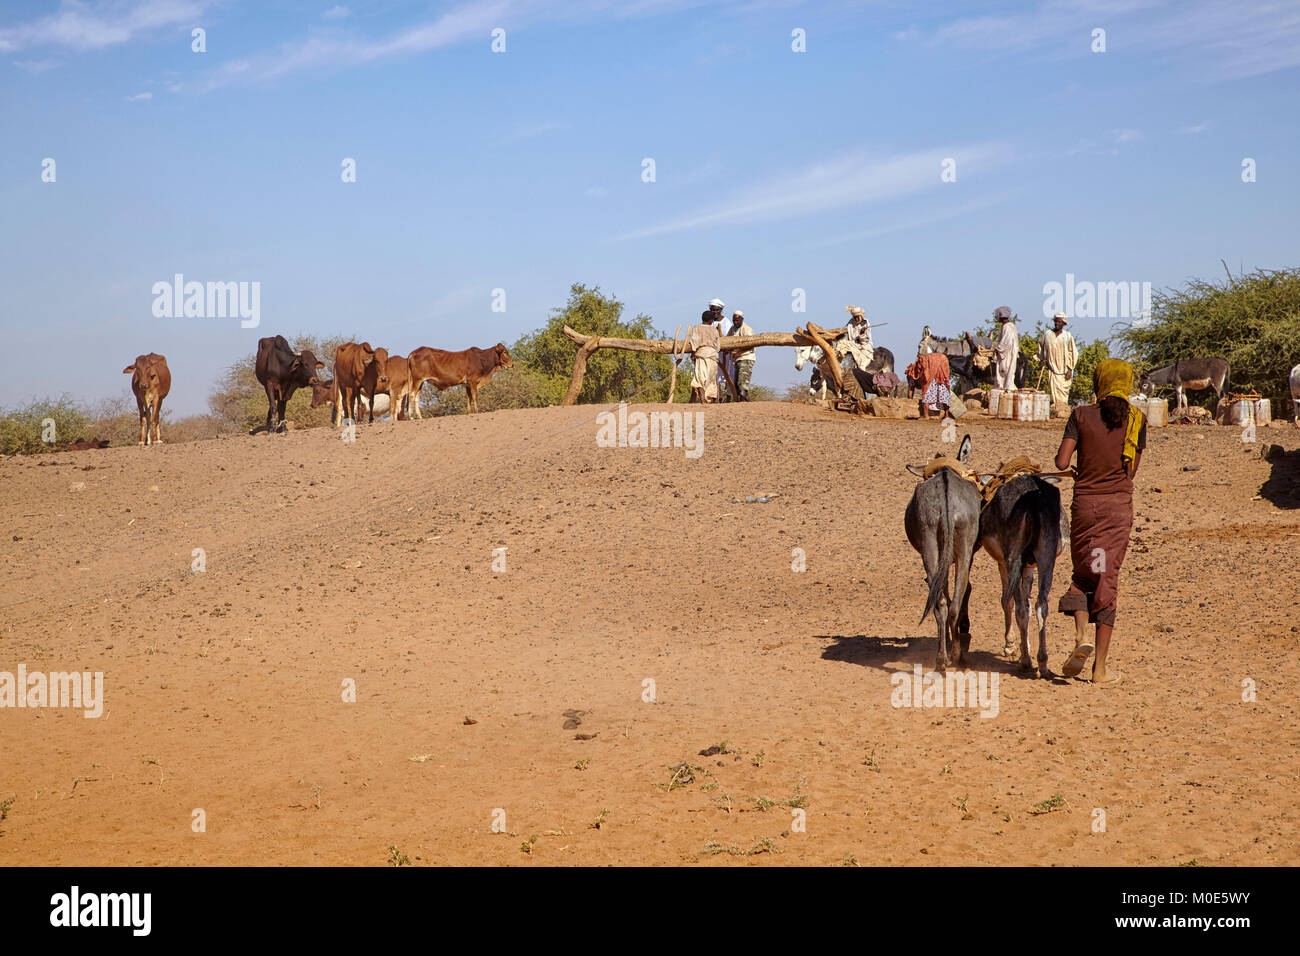 People fetching water from a well with a donkey near Naqa, Sudan (North Sudan), Africa Stock Photo